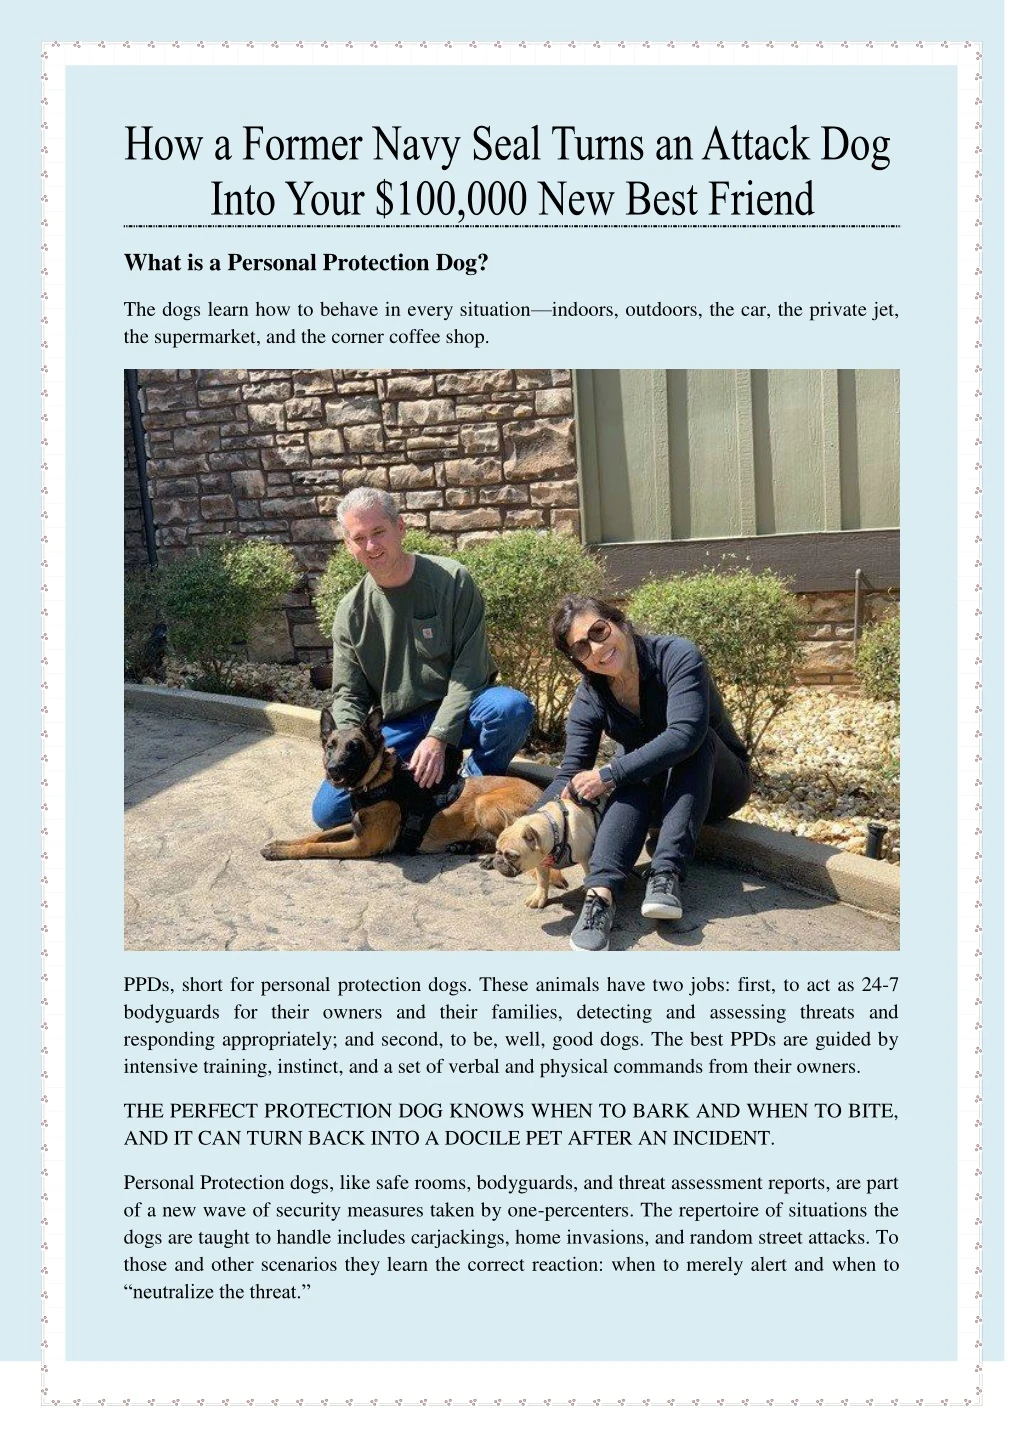 what is a personal protection dog